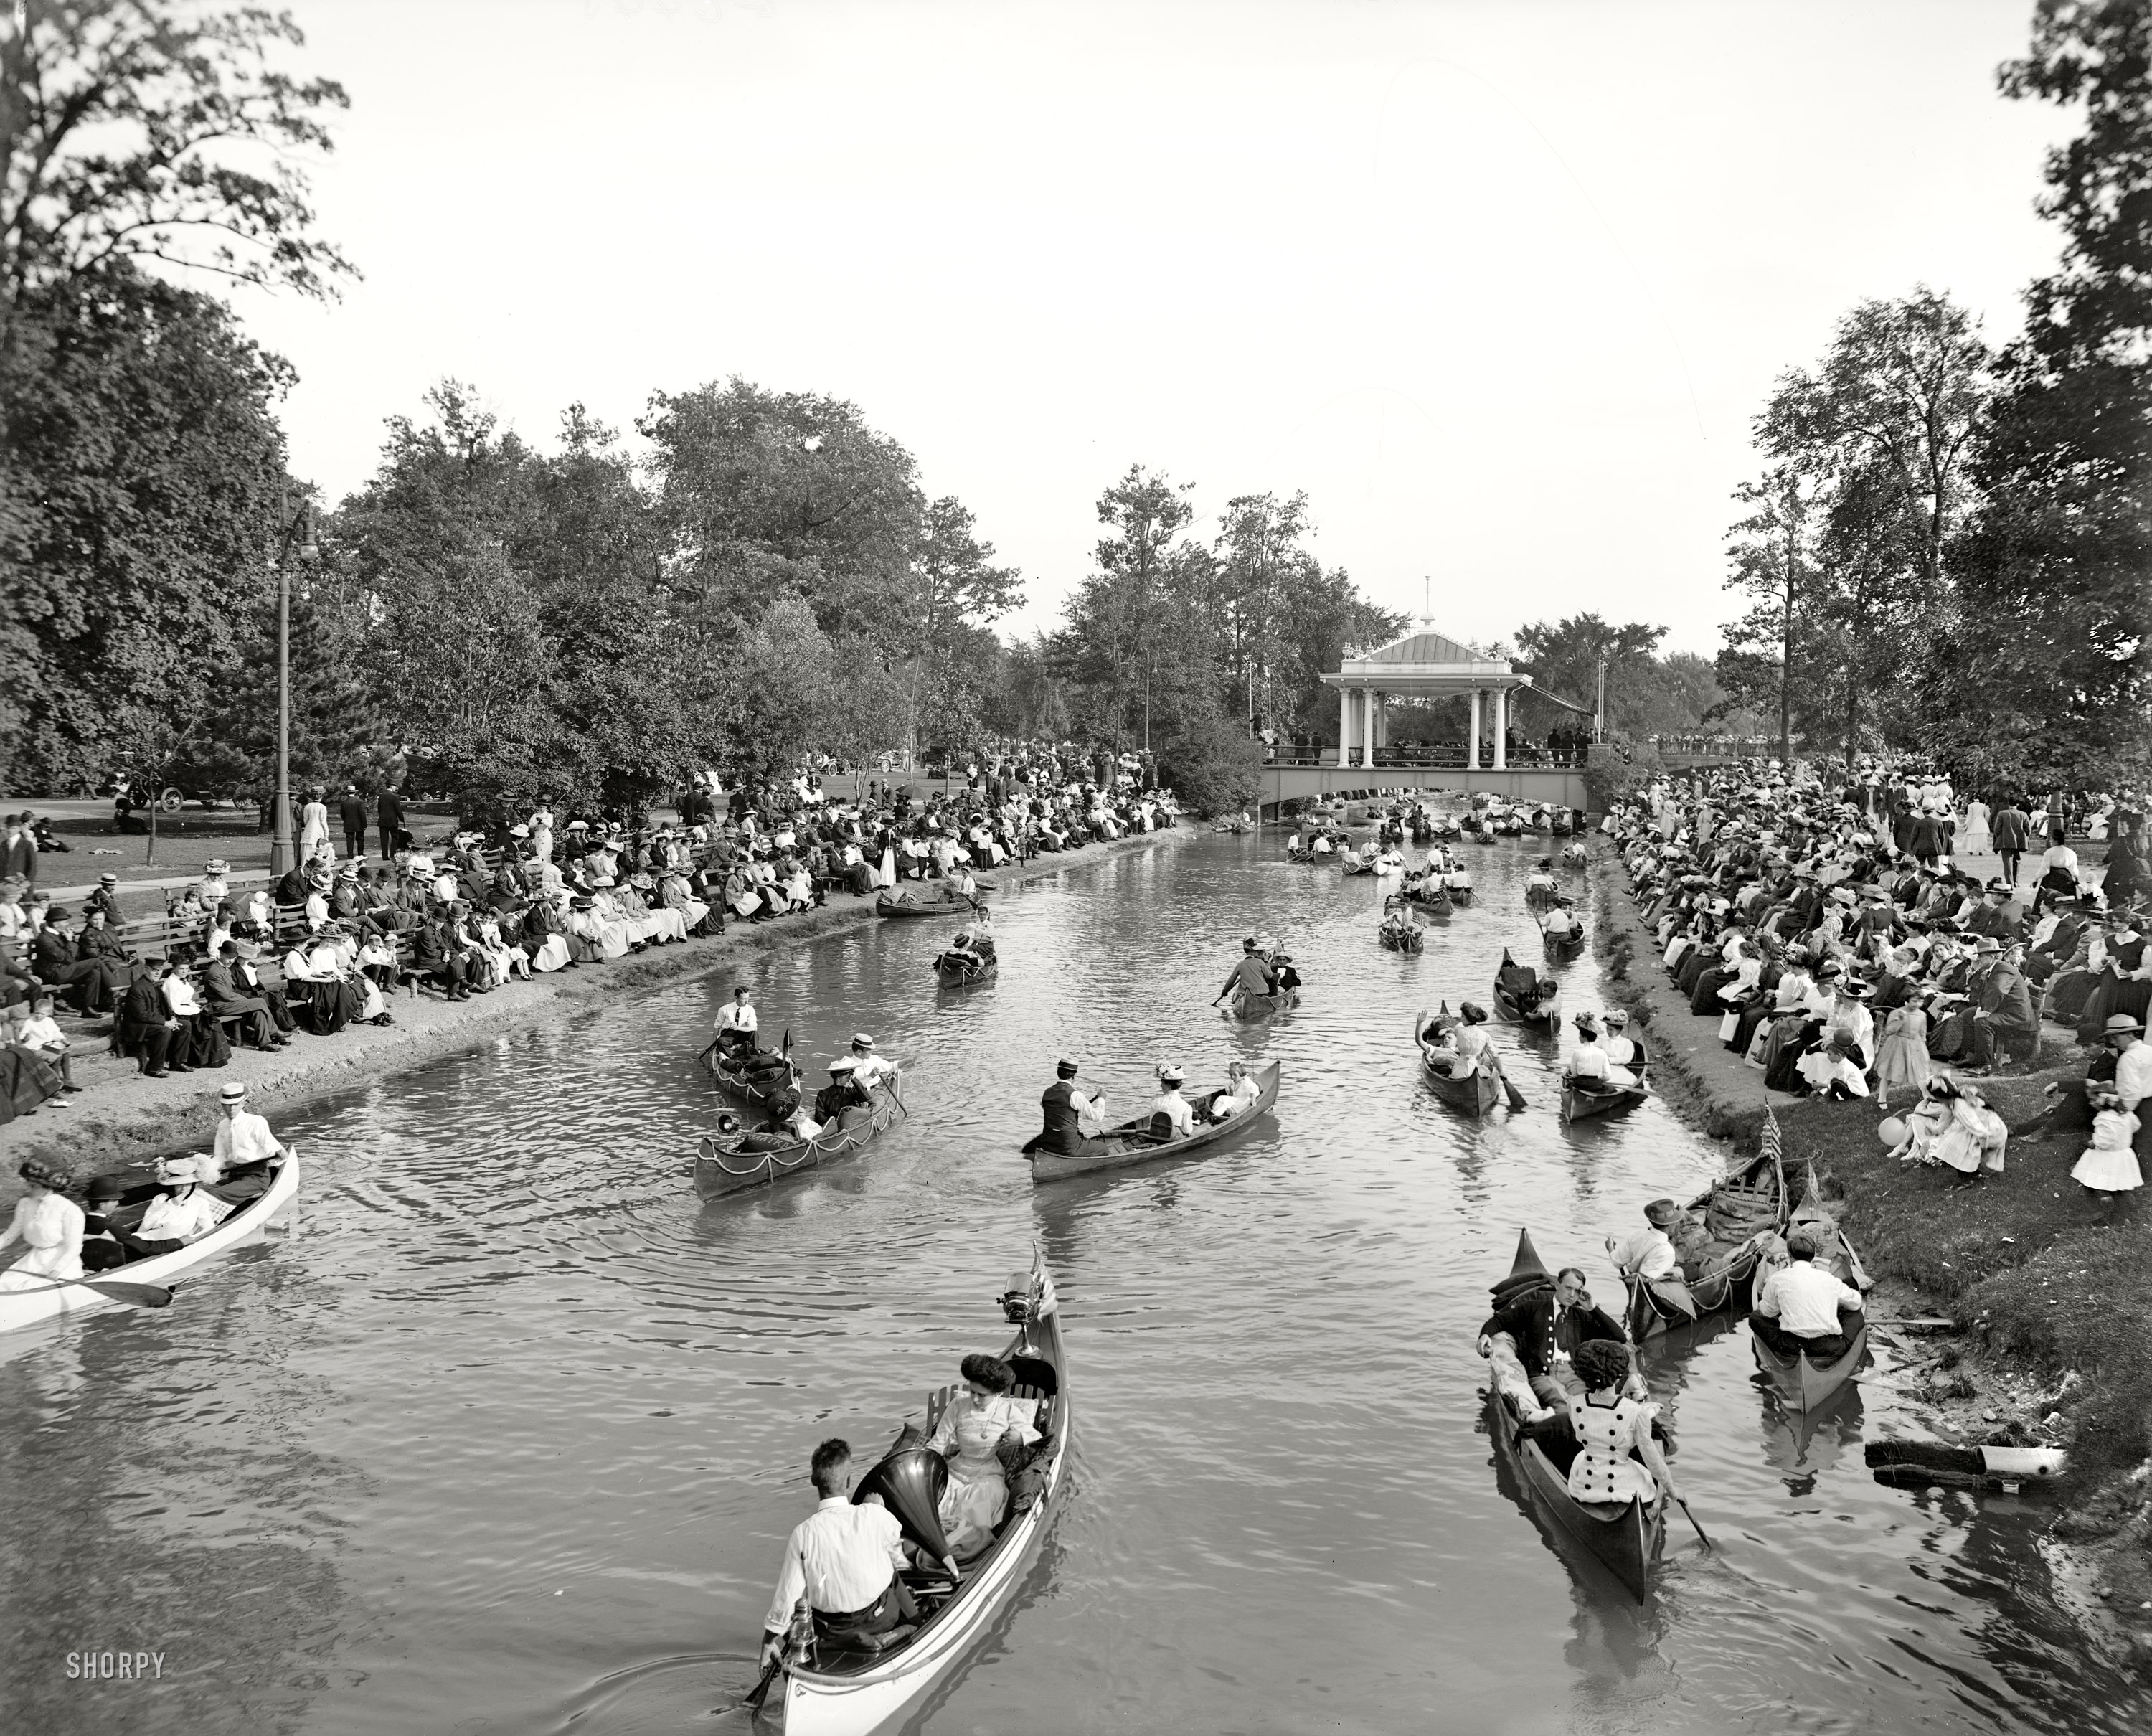 Detroit circa 1907. "Band concert on Grand Canal, Belle Isle Park." Once upon a time it might have been possible to woo a girl with just a humble canoe, but now you need plush pillows and a phonograph. 8x10 glass negative. View full size.